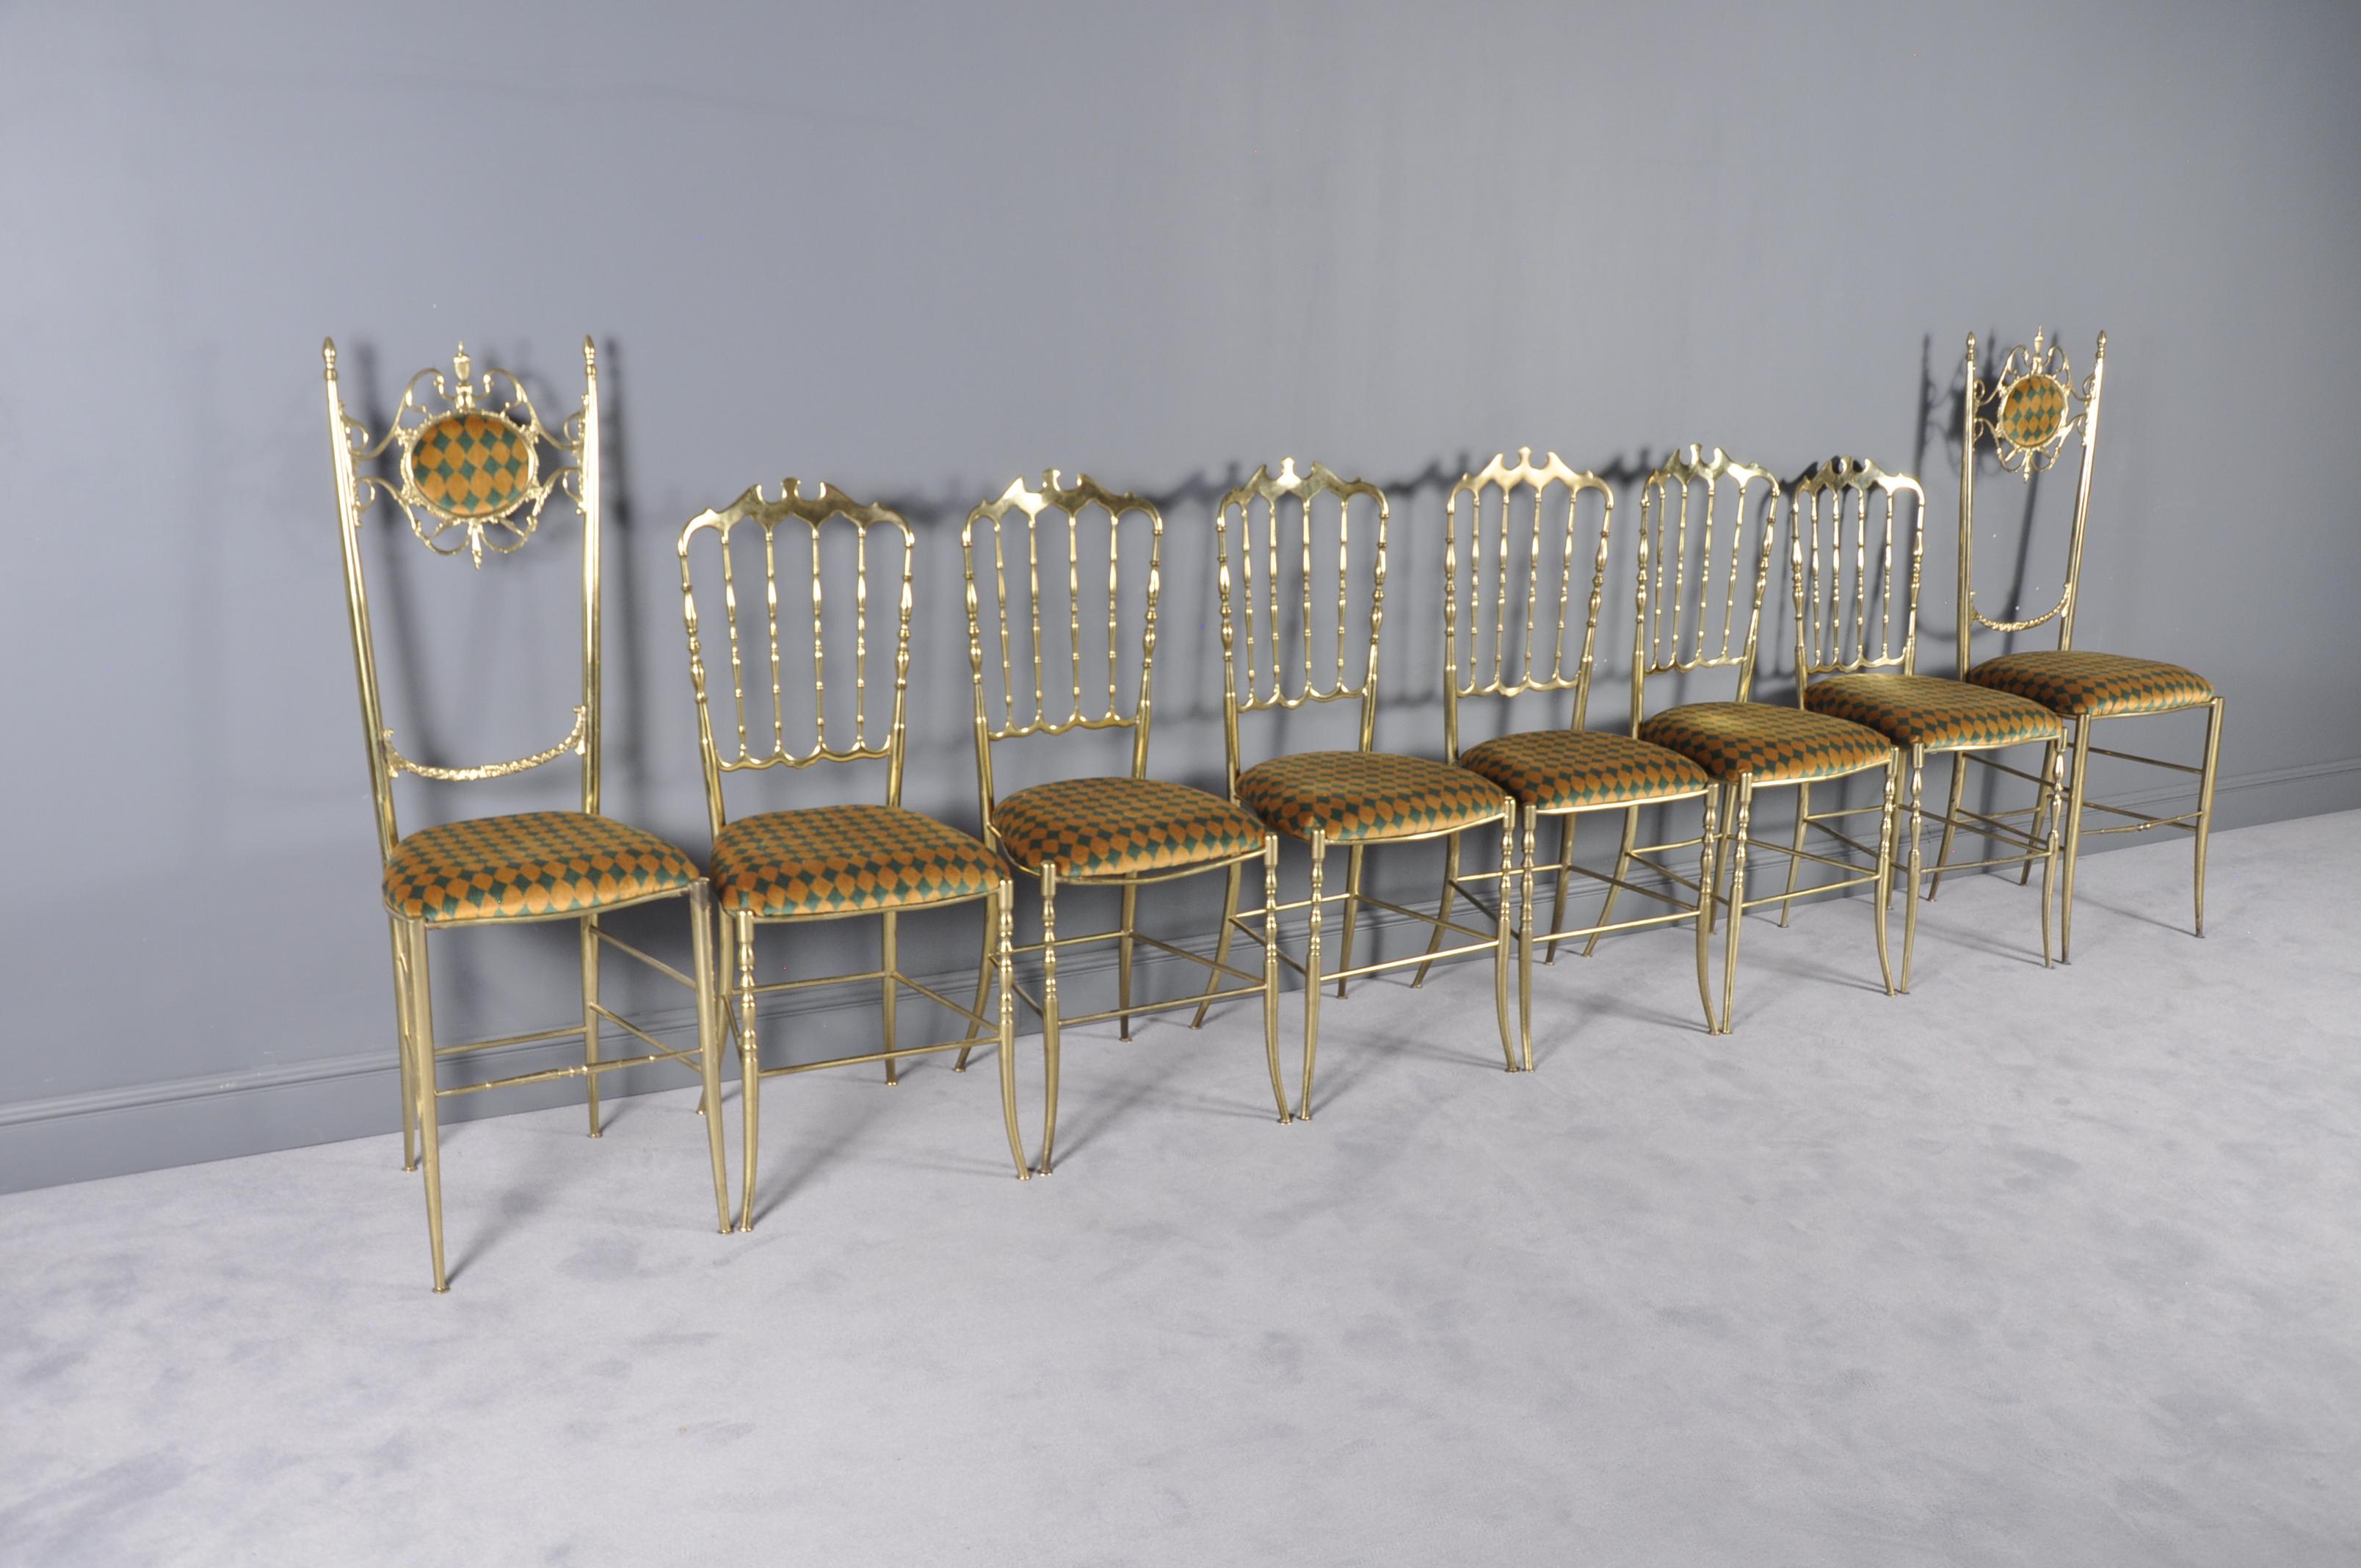 This set of eight lightweight Chiavari chairs in the Hollywood Regency style is made of solid brass. The pieces feature crest rails, spindled backs, and new multicolored velvet upholstery.
The Chiavari chairs are named after the Italian city where